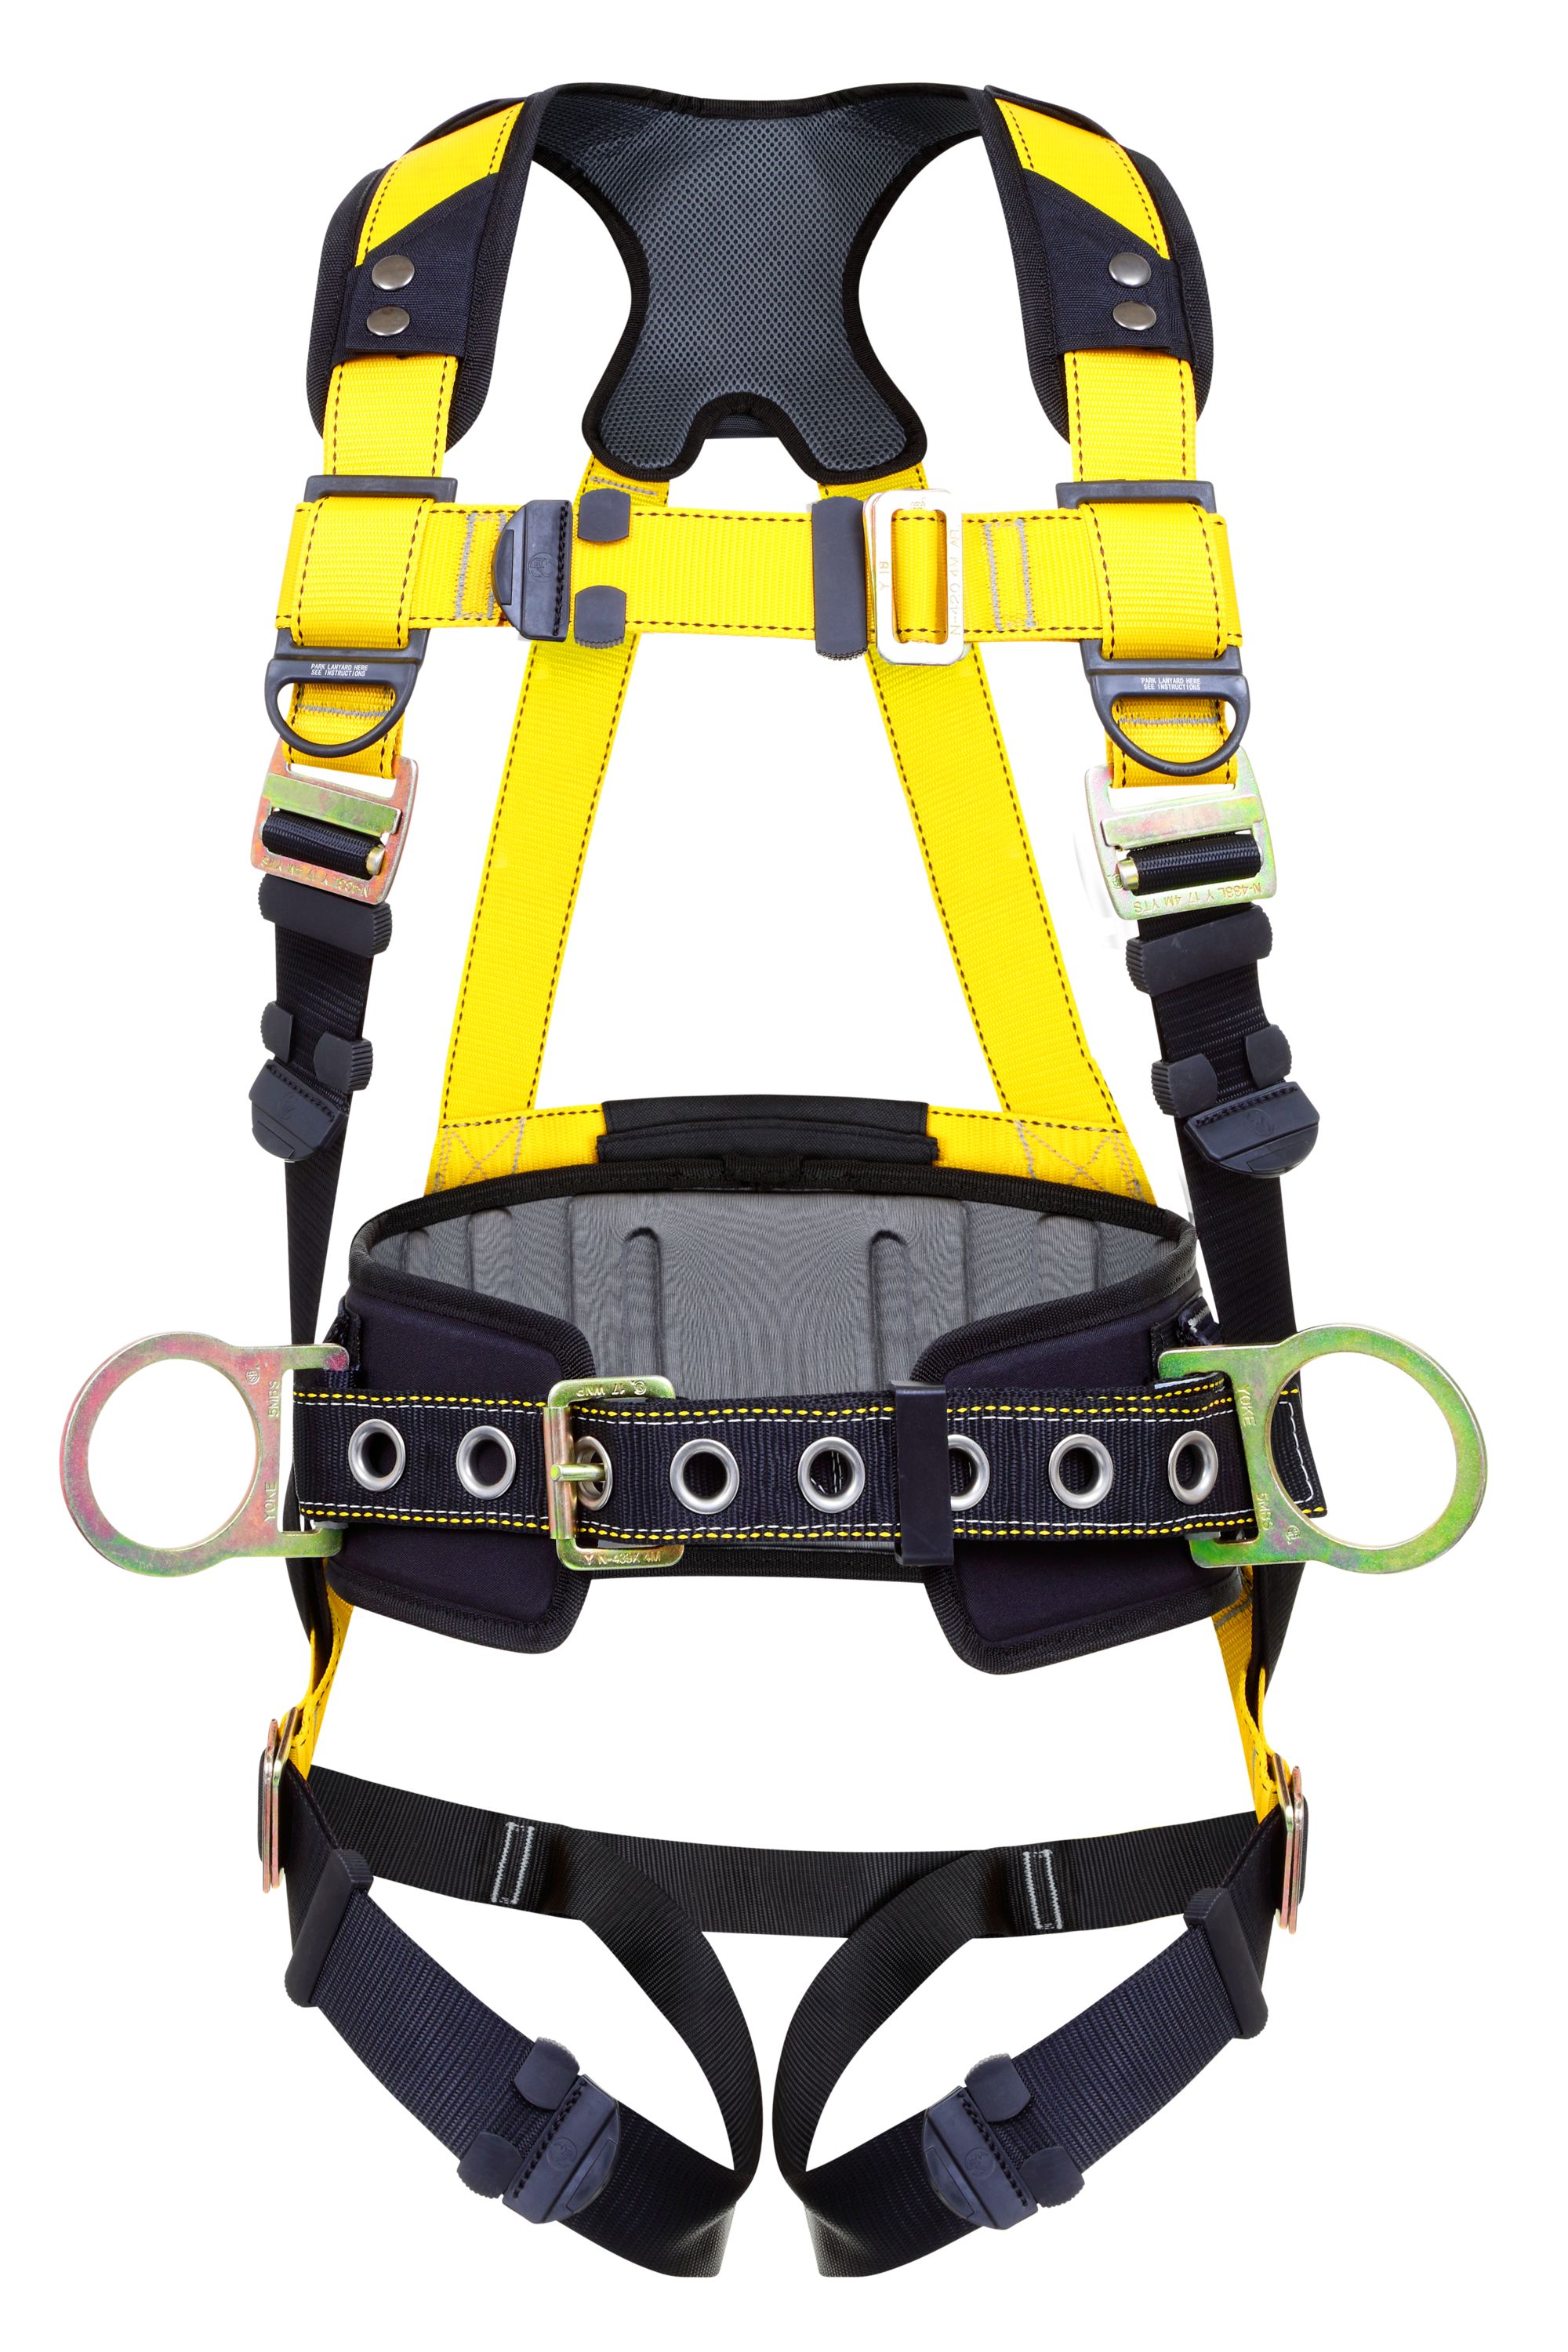 The Series 3 and Series 5 full-body fall protection harnesses are used for personal fall arrest,